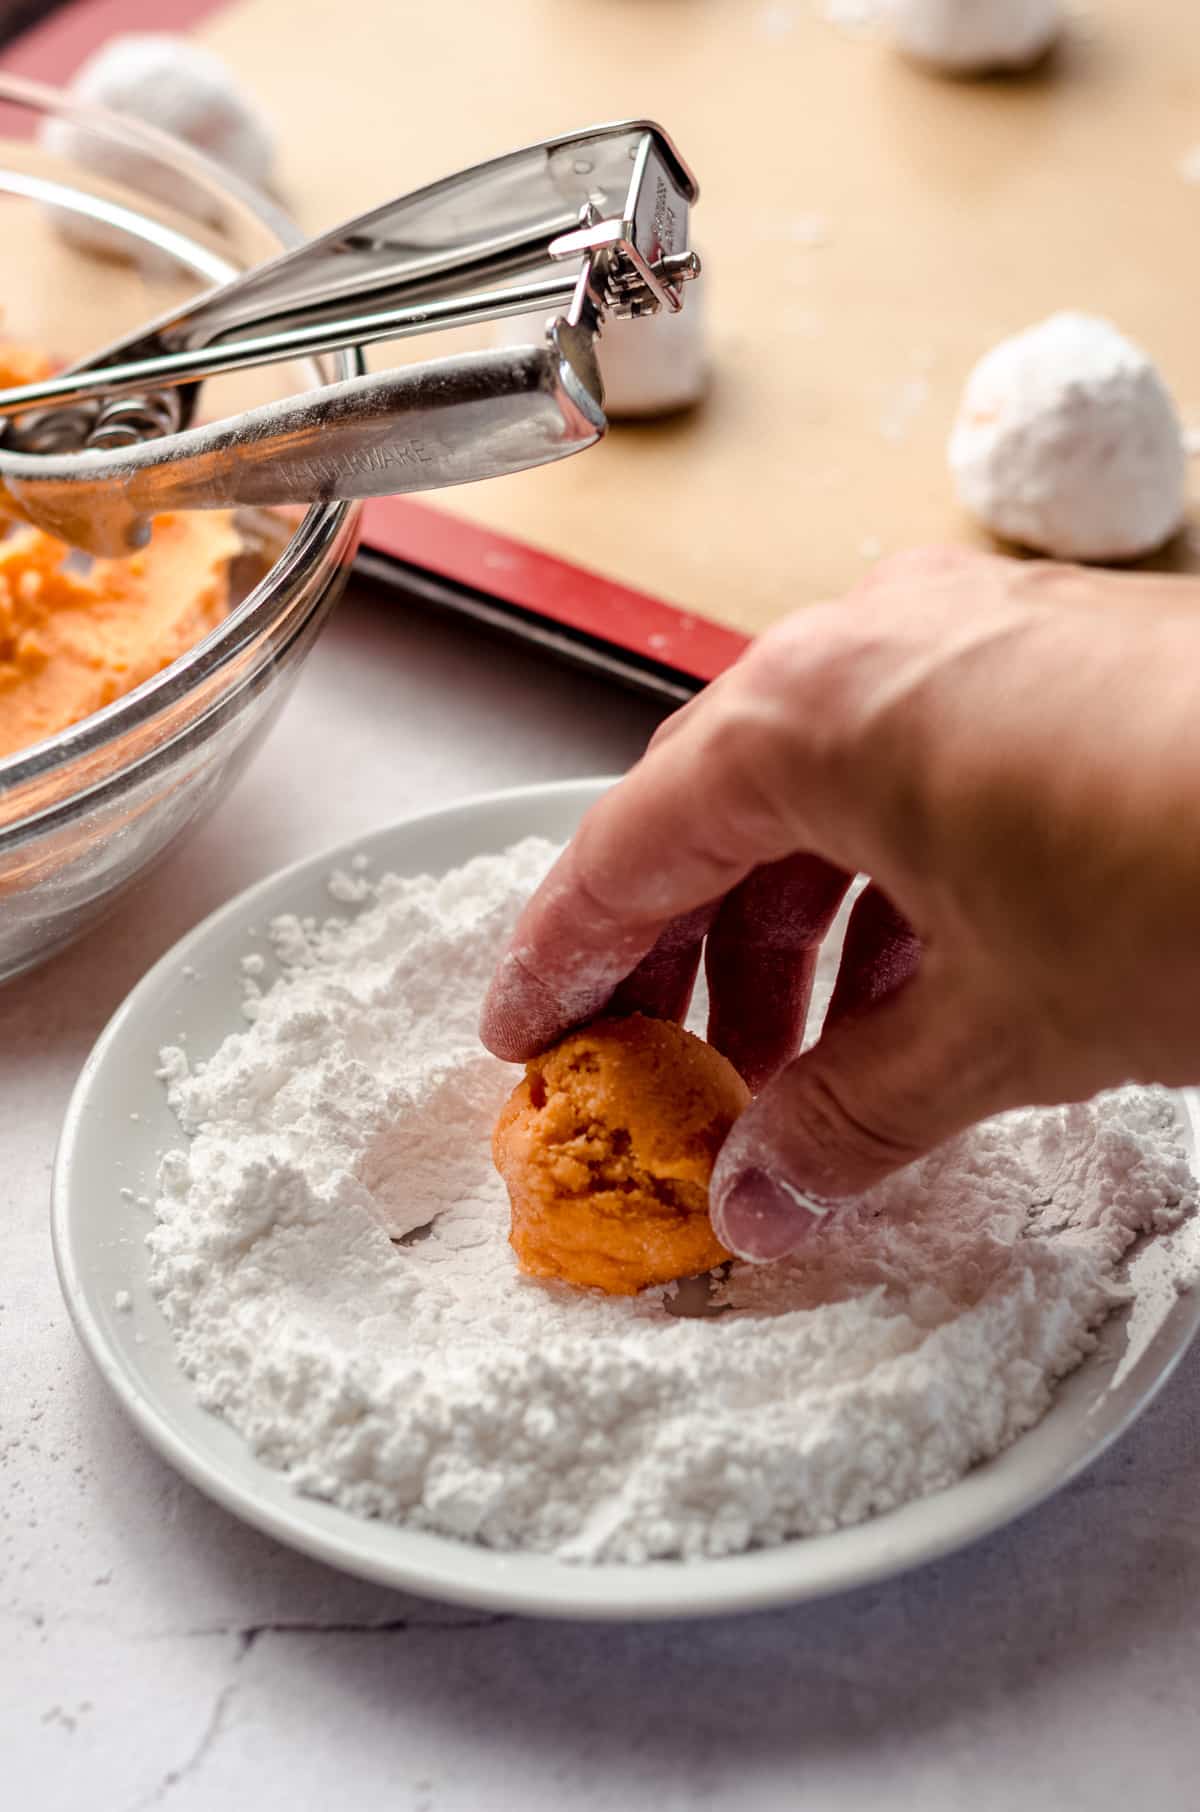 a hand rolling orange creamsicle cookie dough in powdered sugar to make crinkle style cookies